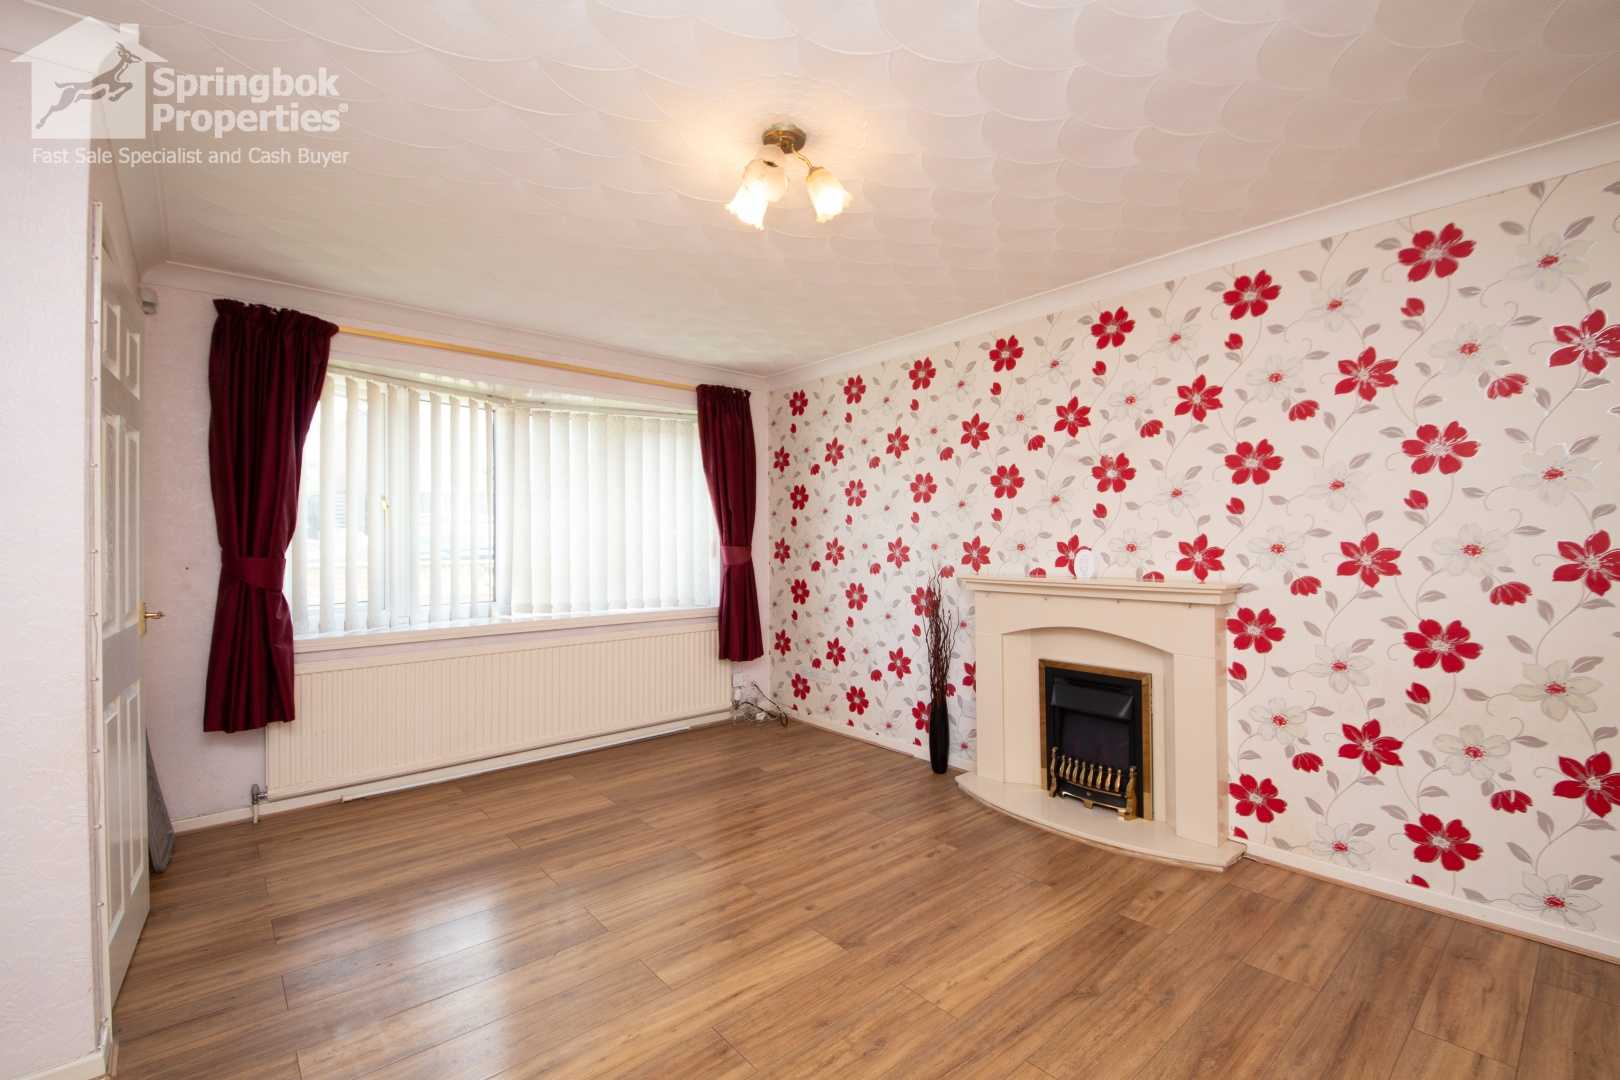 House in Loversall, Doncaster 11924051